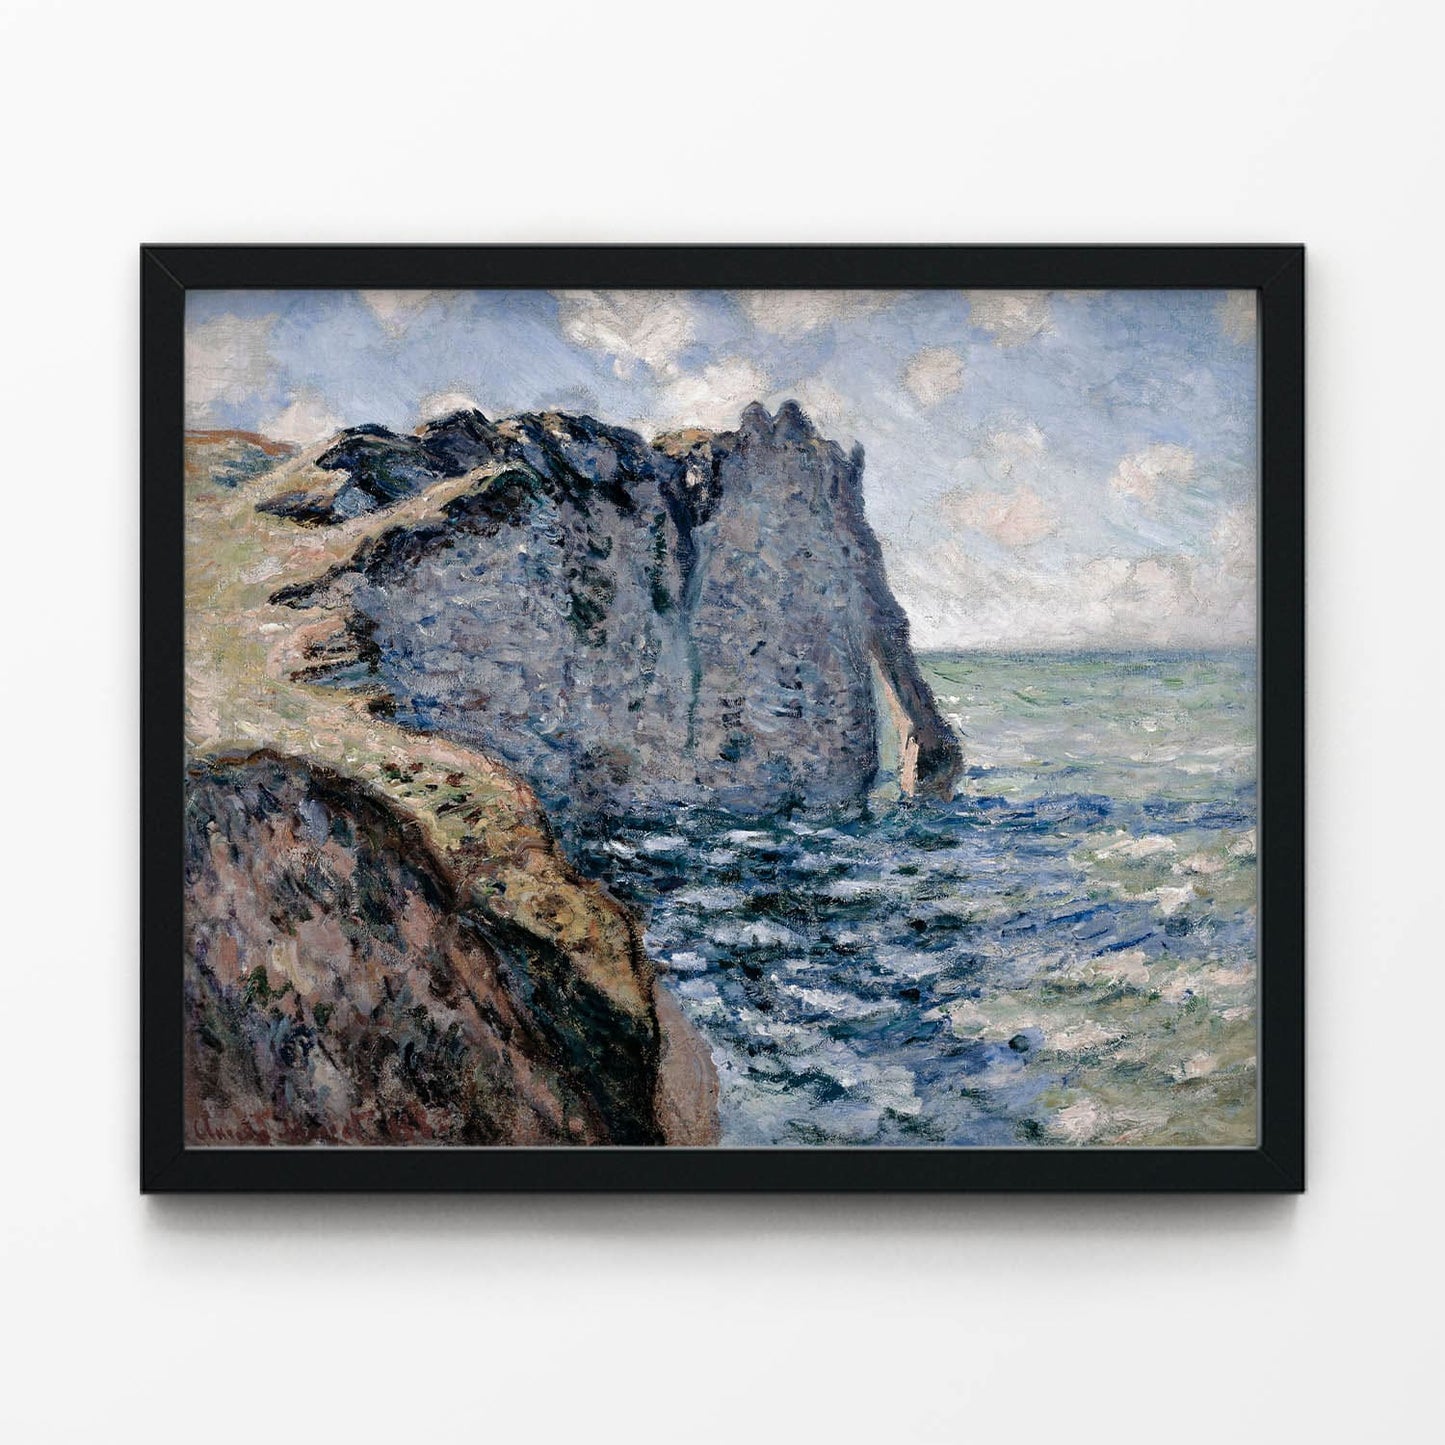 Ocean Cliff Painting in Black Picture Frame